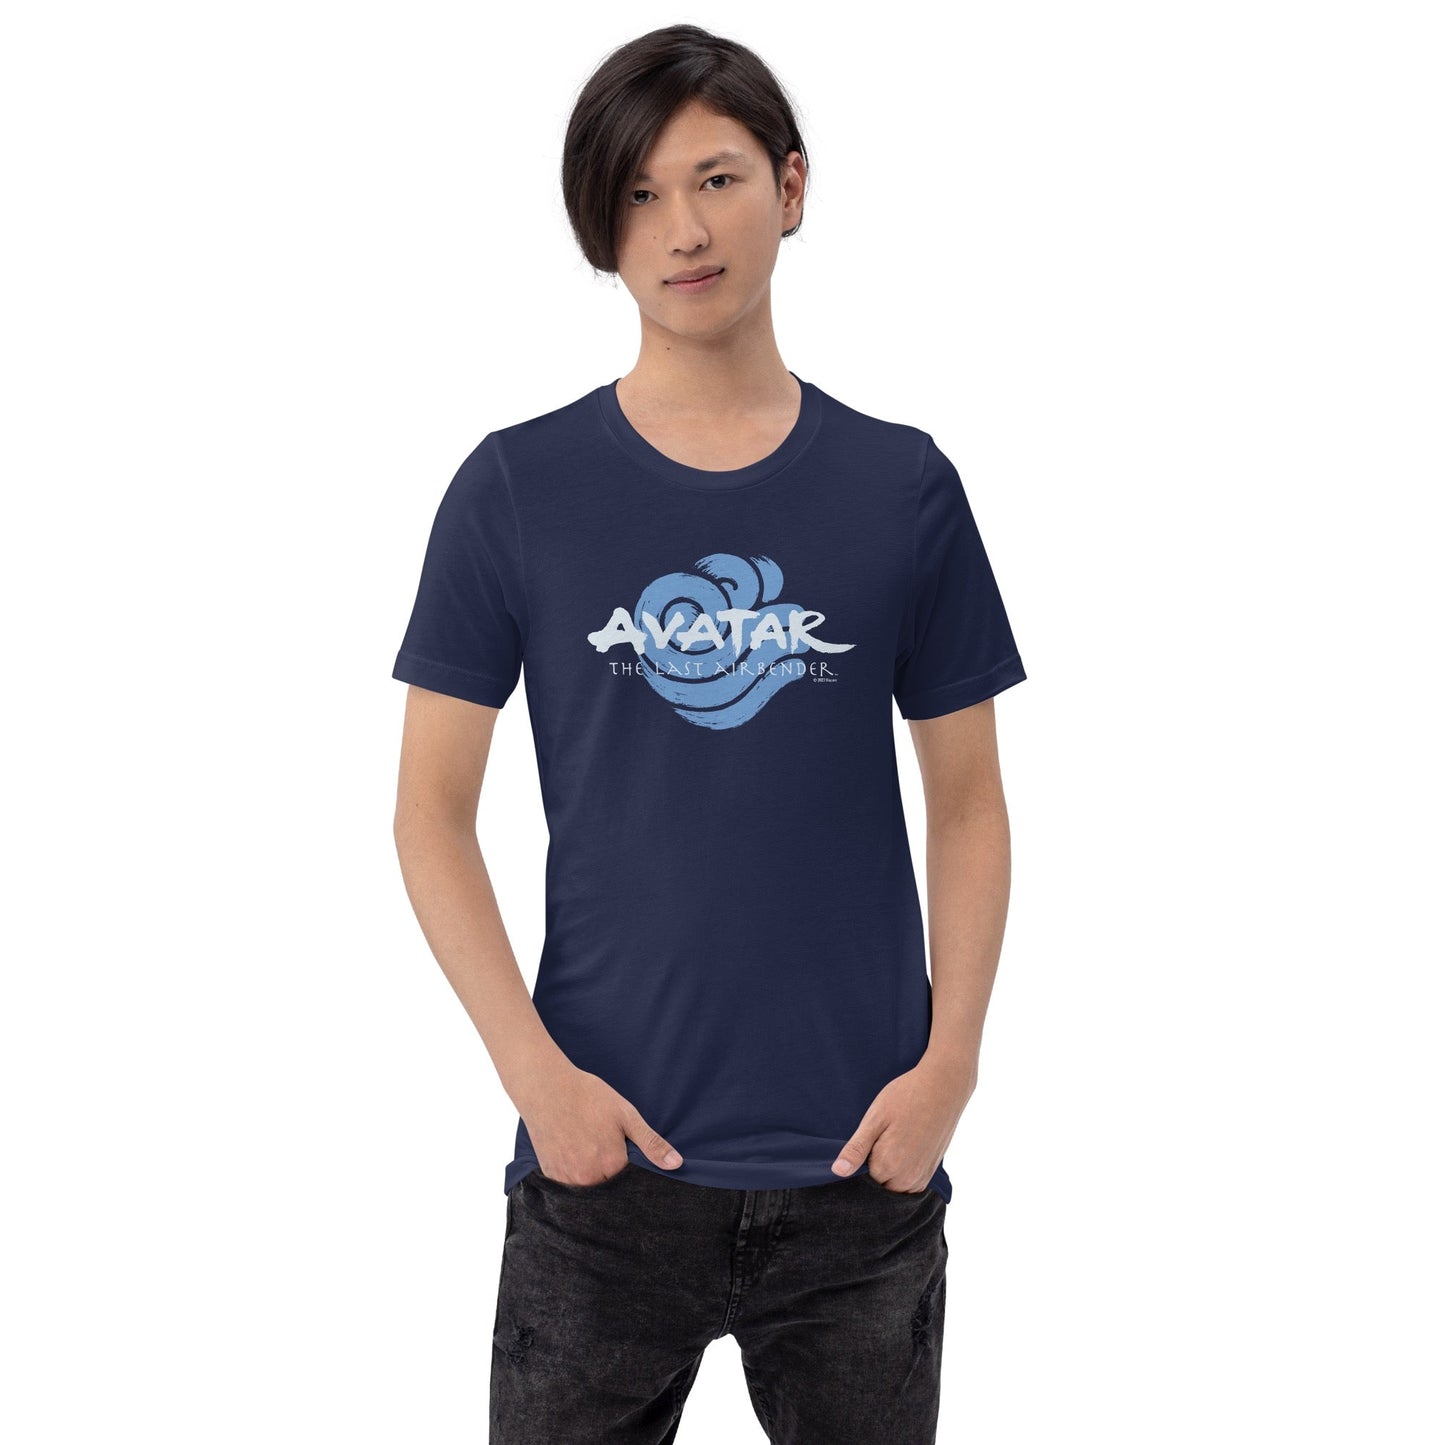 Avatar: The Last Airbender Water Tribe T - Shirt - Paramount Shop